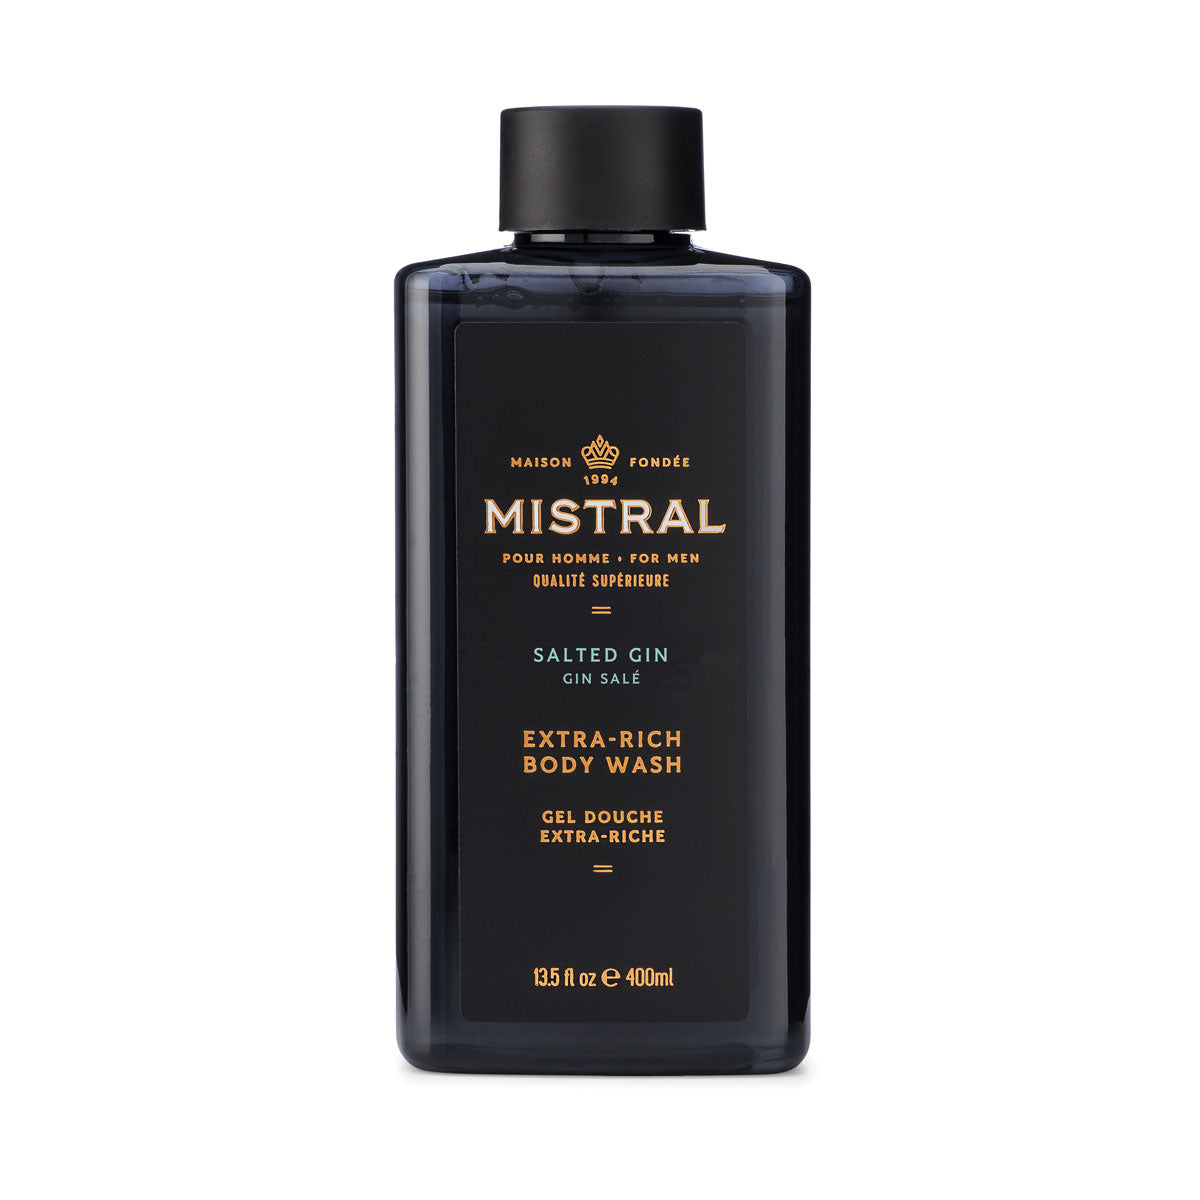 Salted Gin Hand Soap Mistral Men's Collection - 16.9 oz